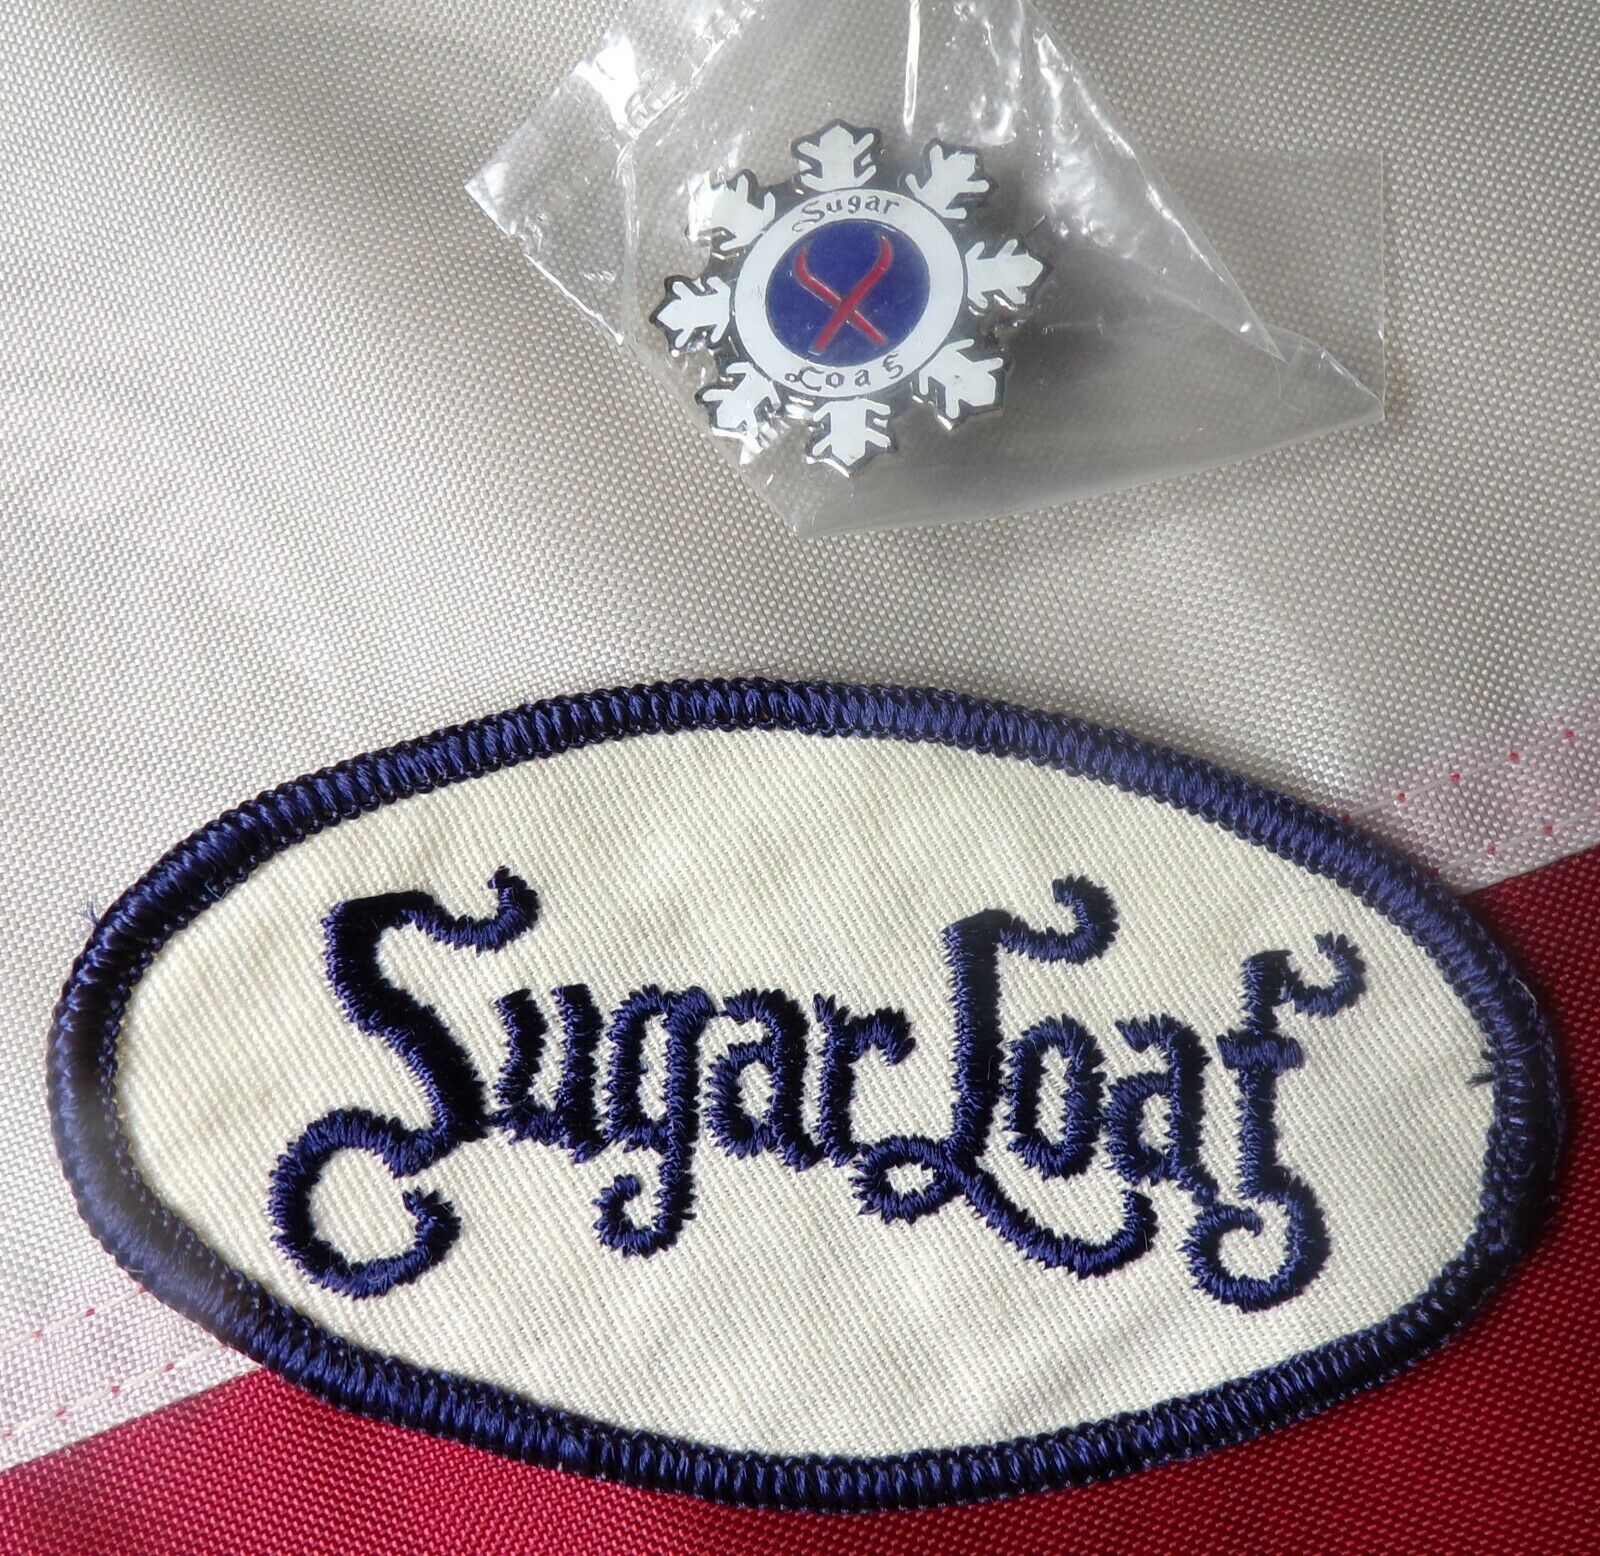 Lot Of 1 Sugar Loaf Skiing Pinback And 1 Sugar Loaf Skiing Patch!!!